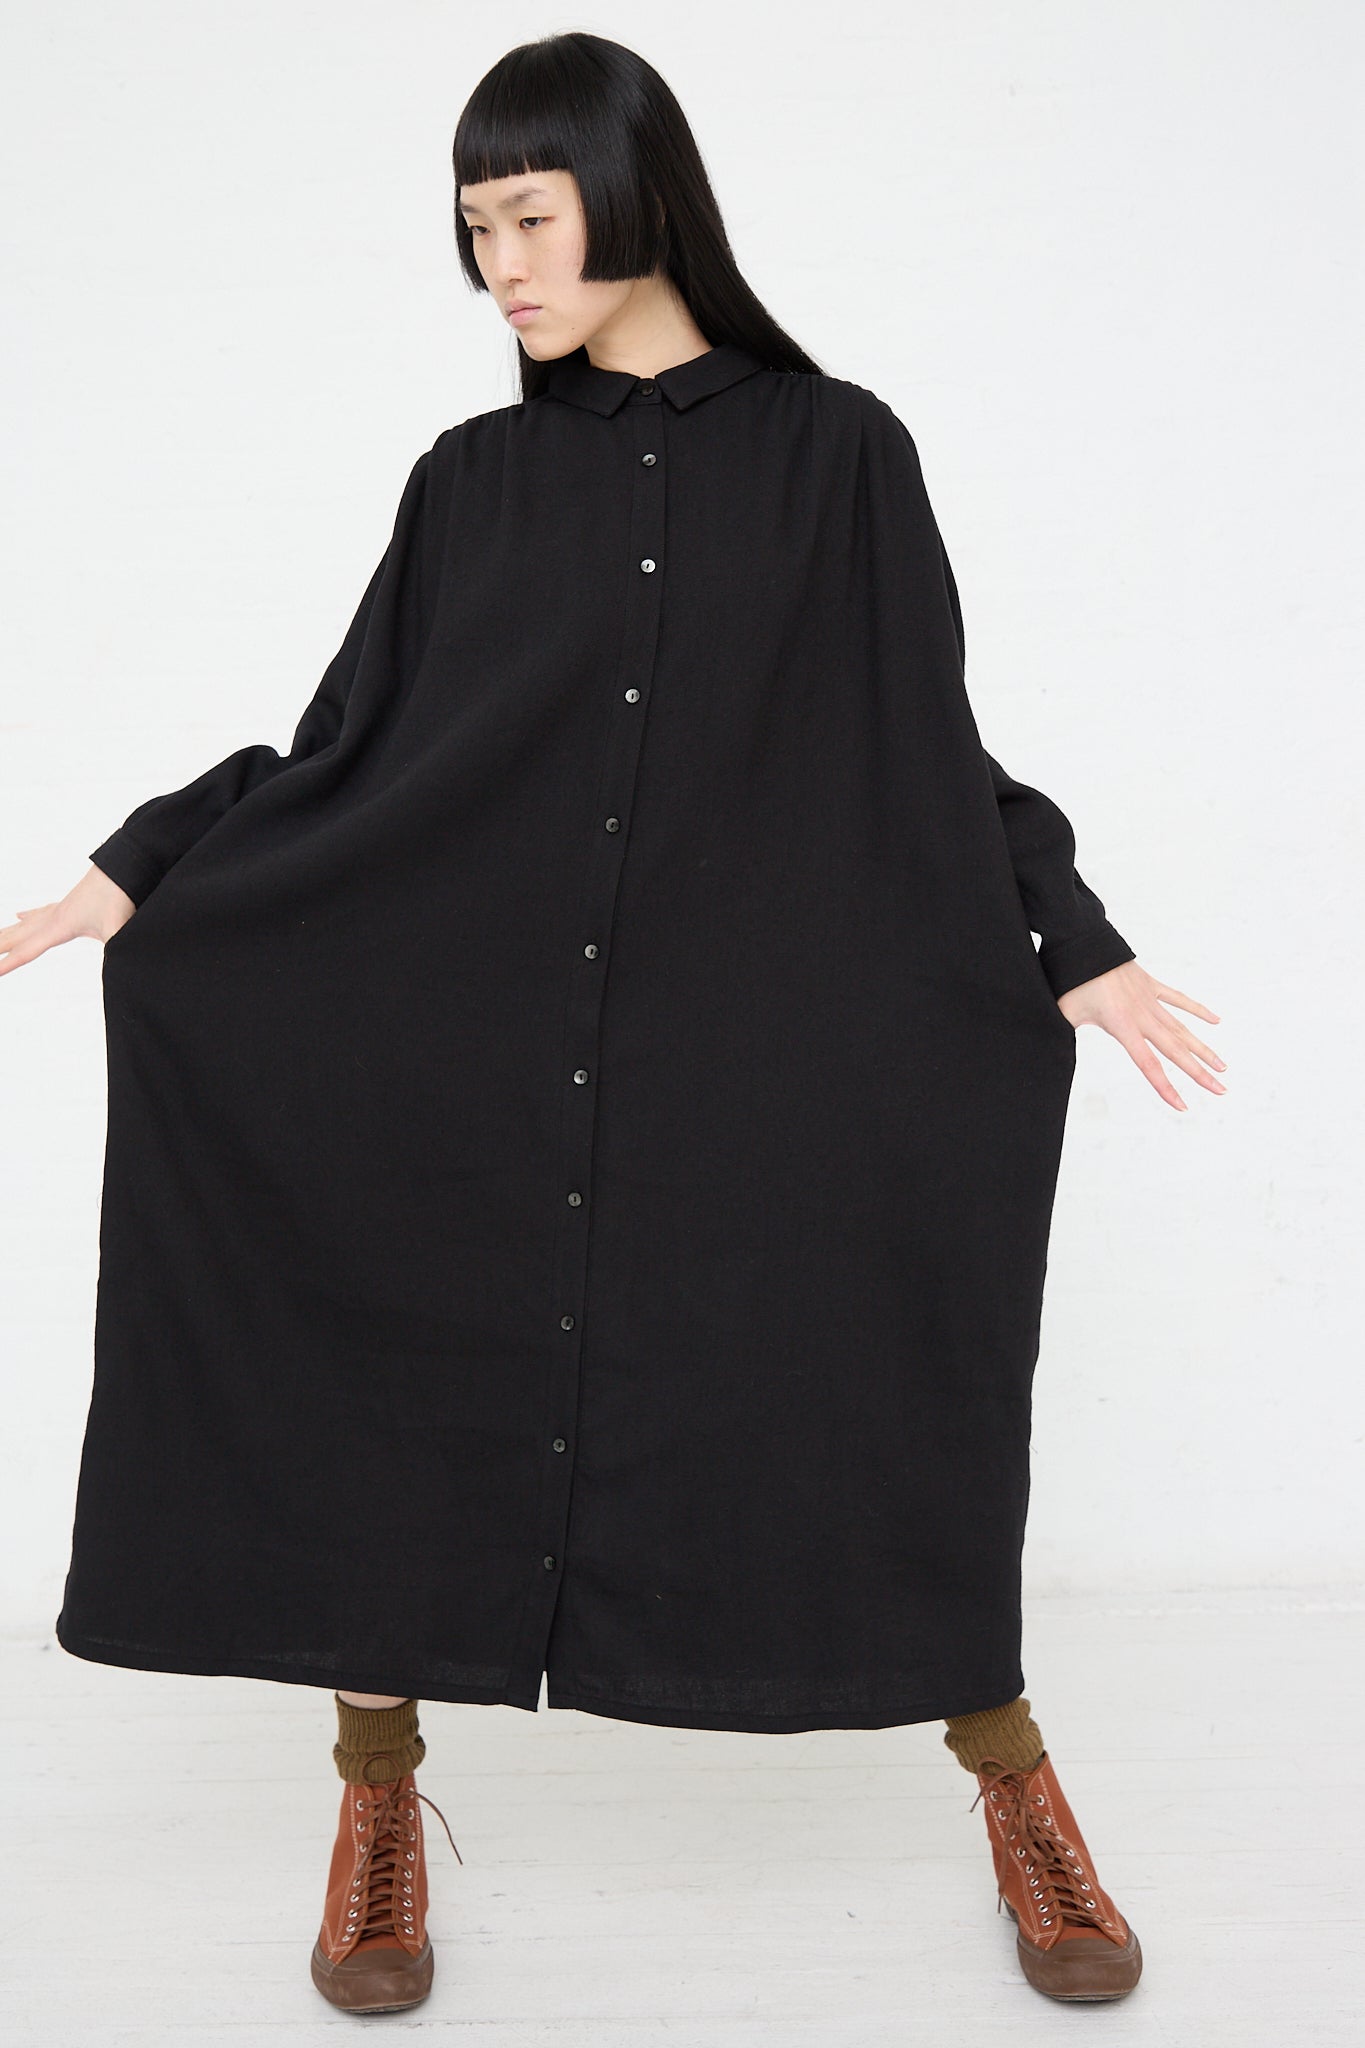 A woman wearing a long sleeve Ichi woven dress in black made of natural fibers.